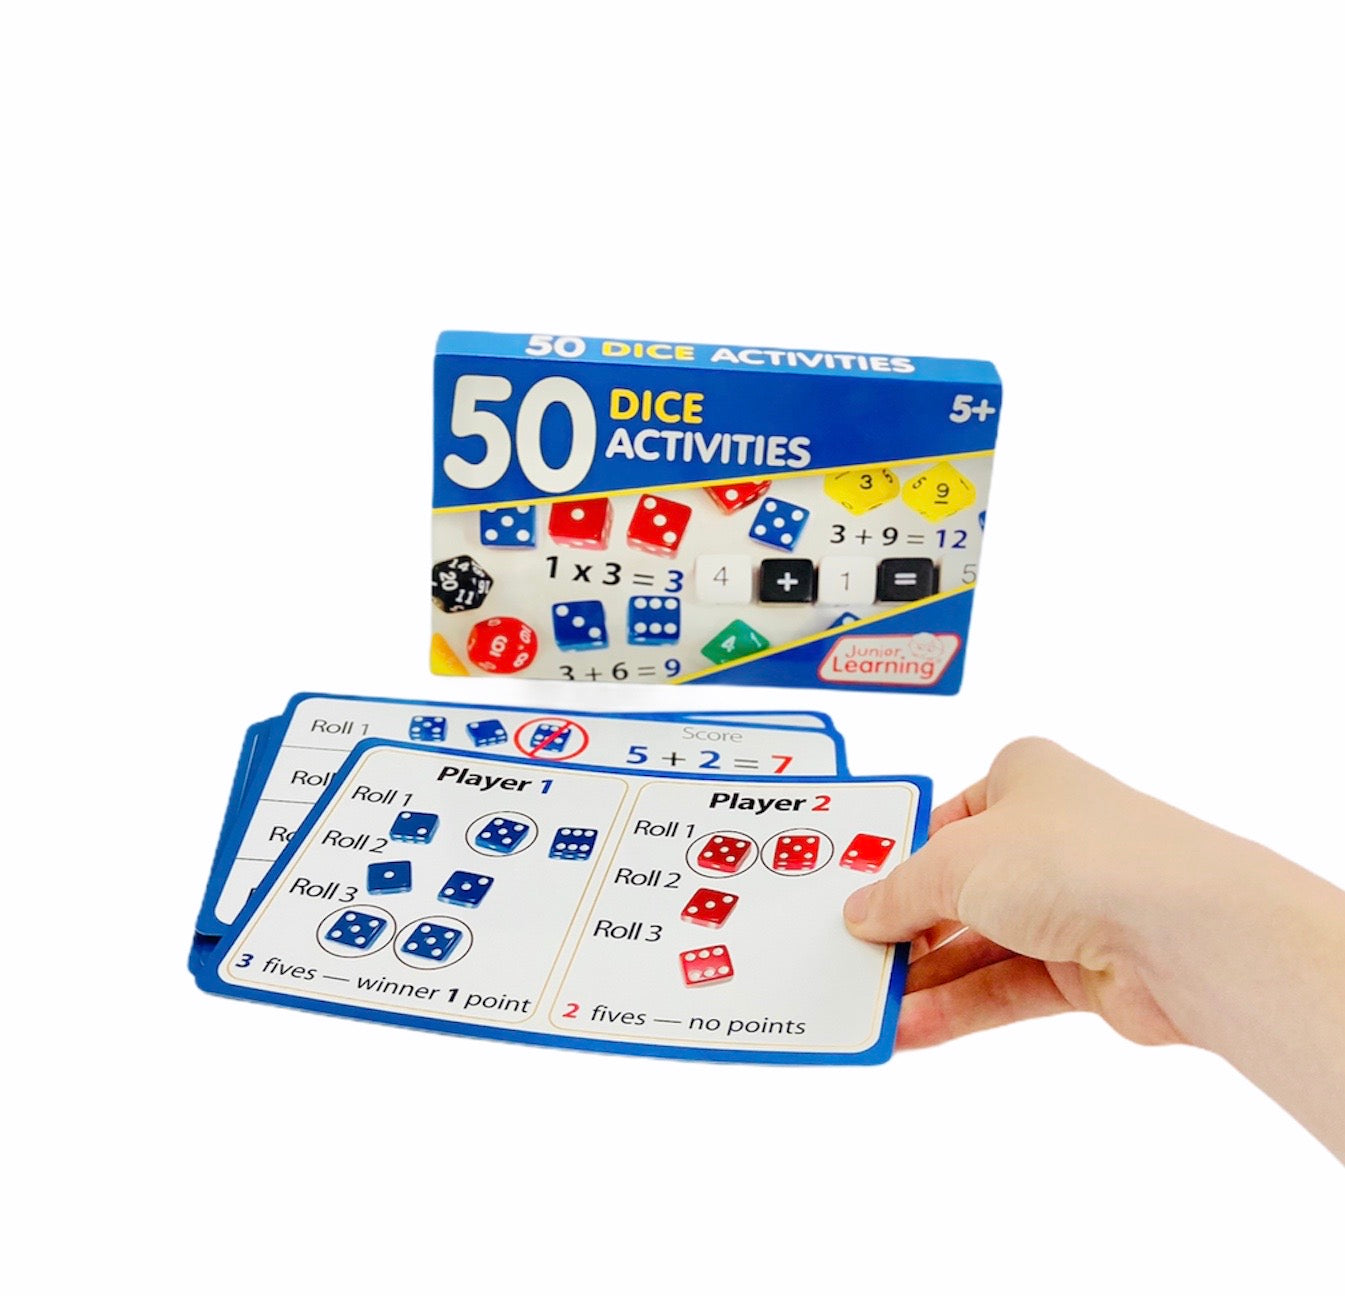 50 Dice Activities with hand holding cards on white background